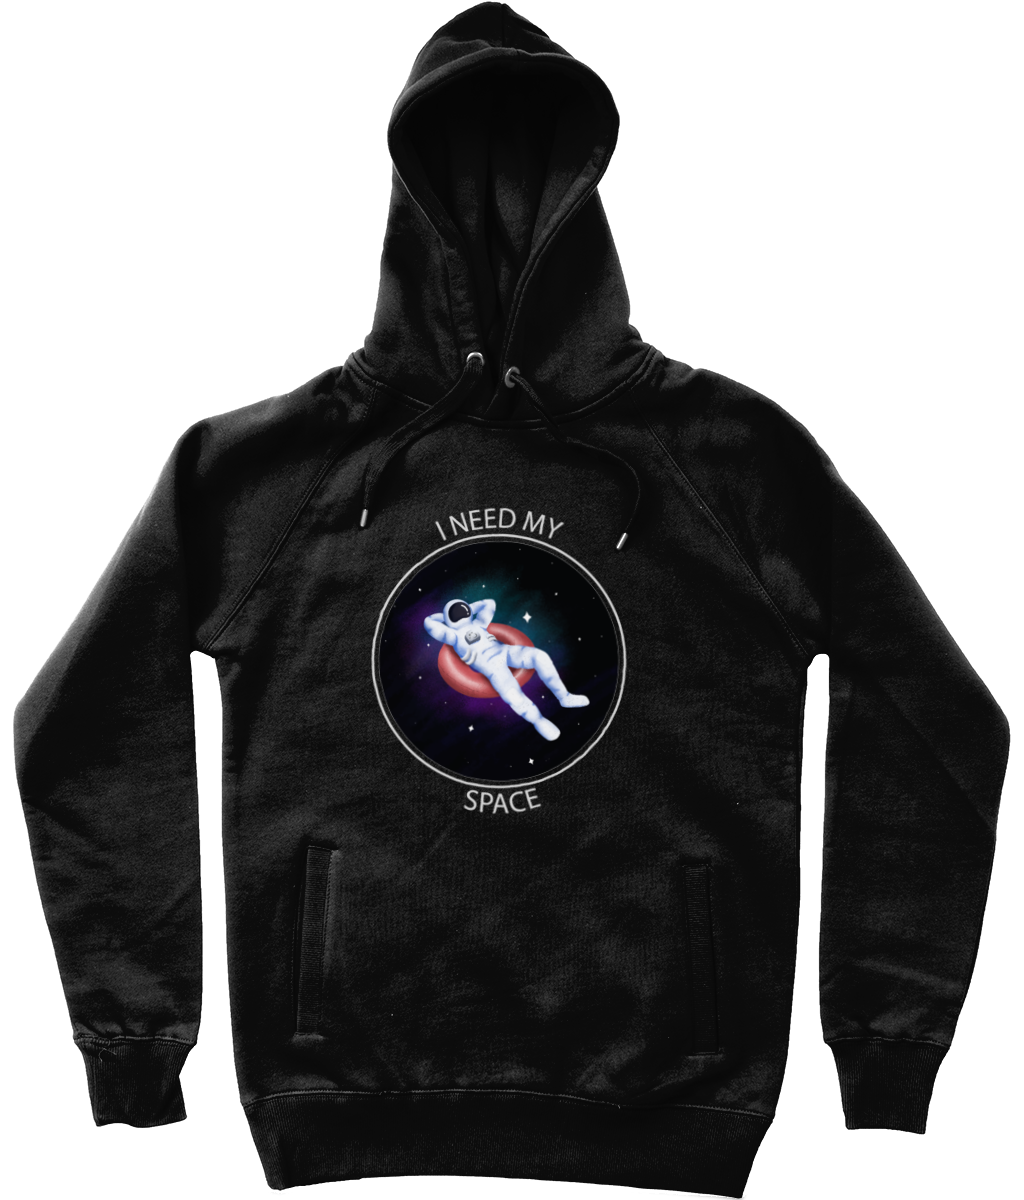 'I Need My Space' Astronaut Graphic Trendy Unisex Pullover Hoodie